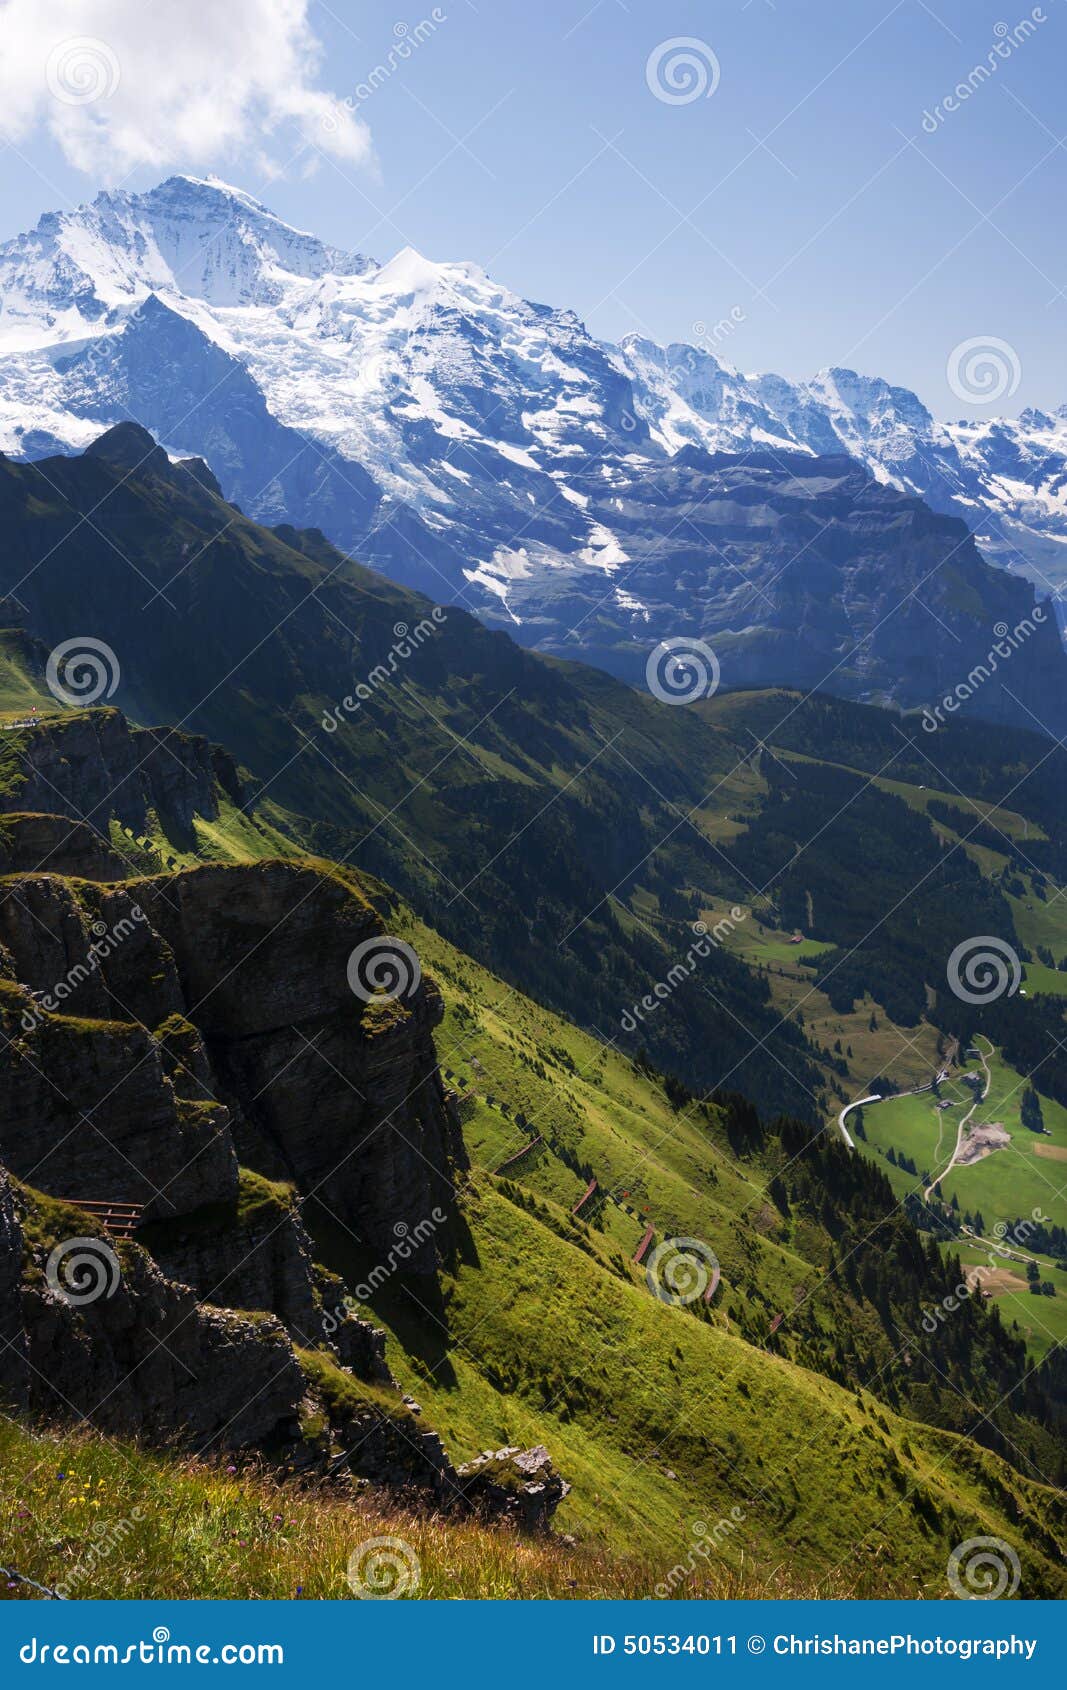 jungfrau slopes and swiss valleys